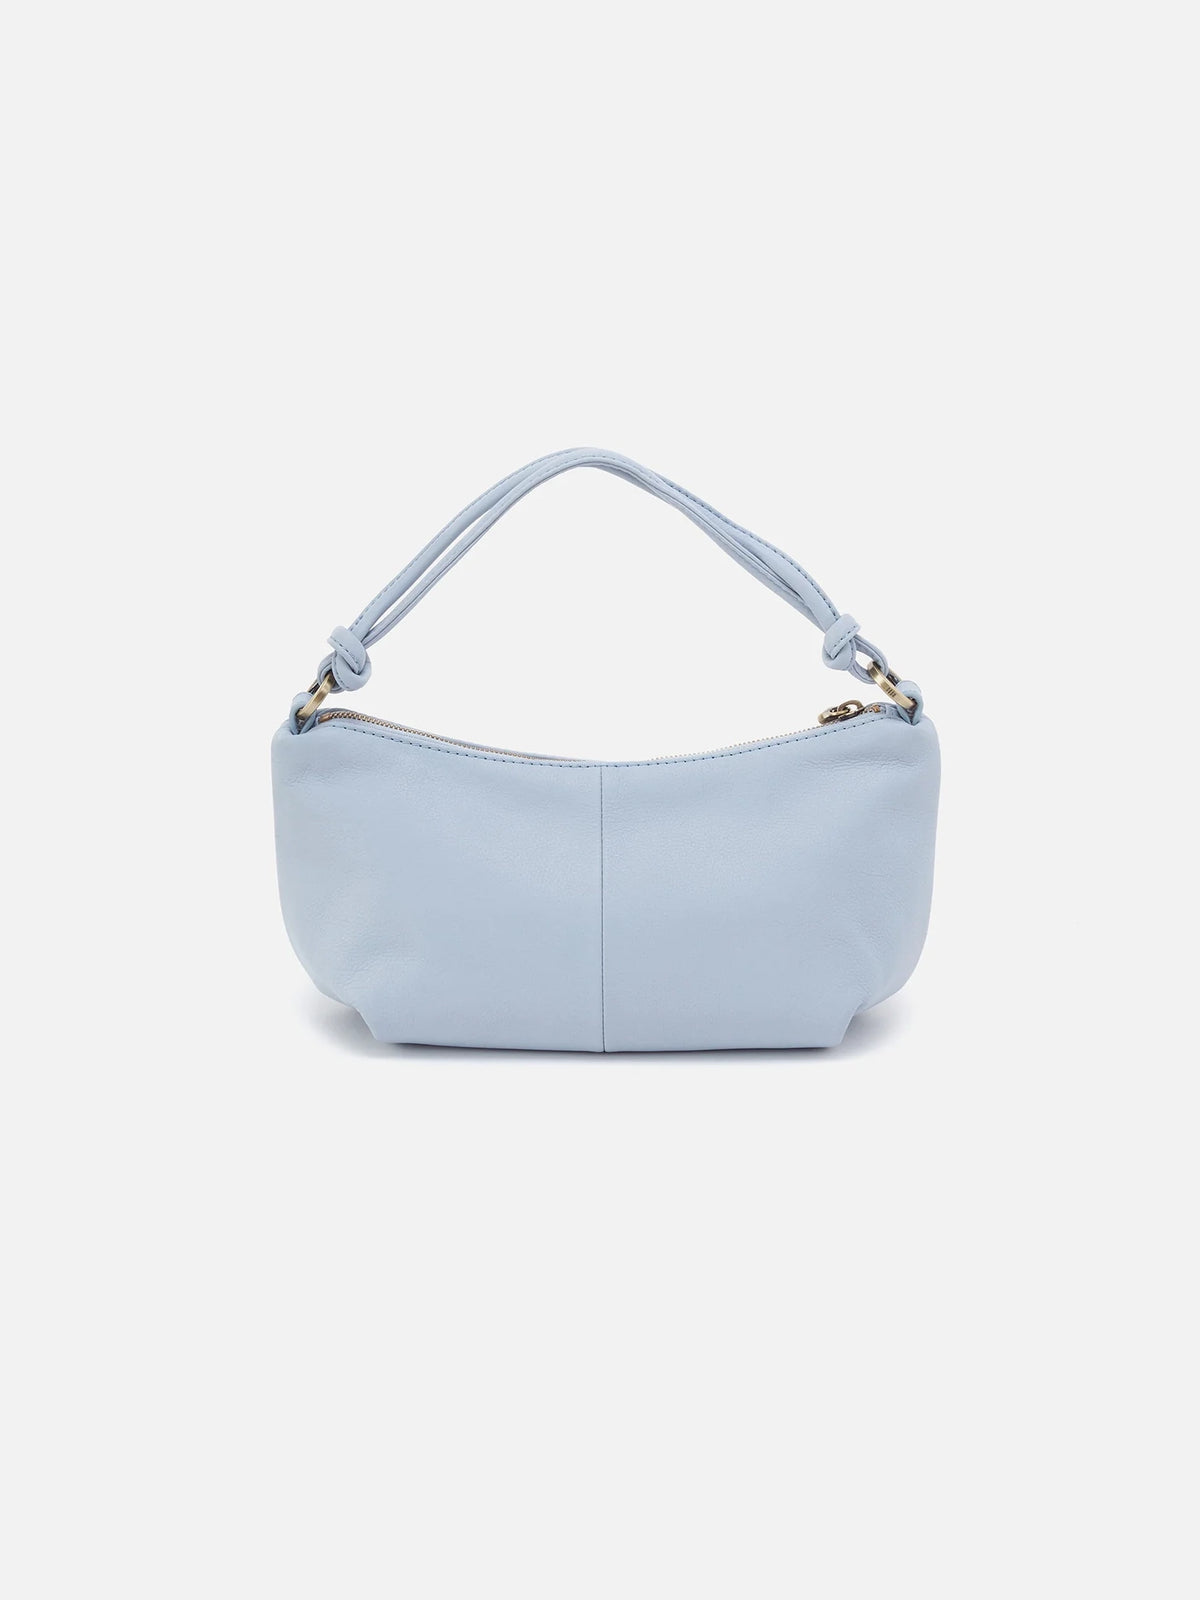 hobo lindley crossbody soft pebbled leather in pale blue-back  view